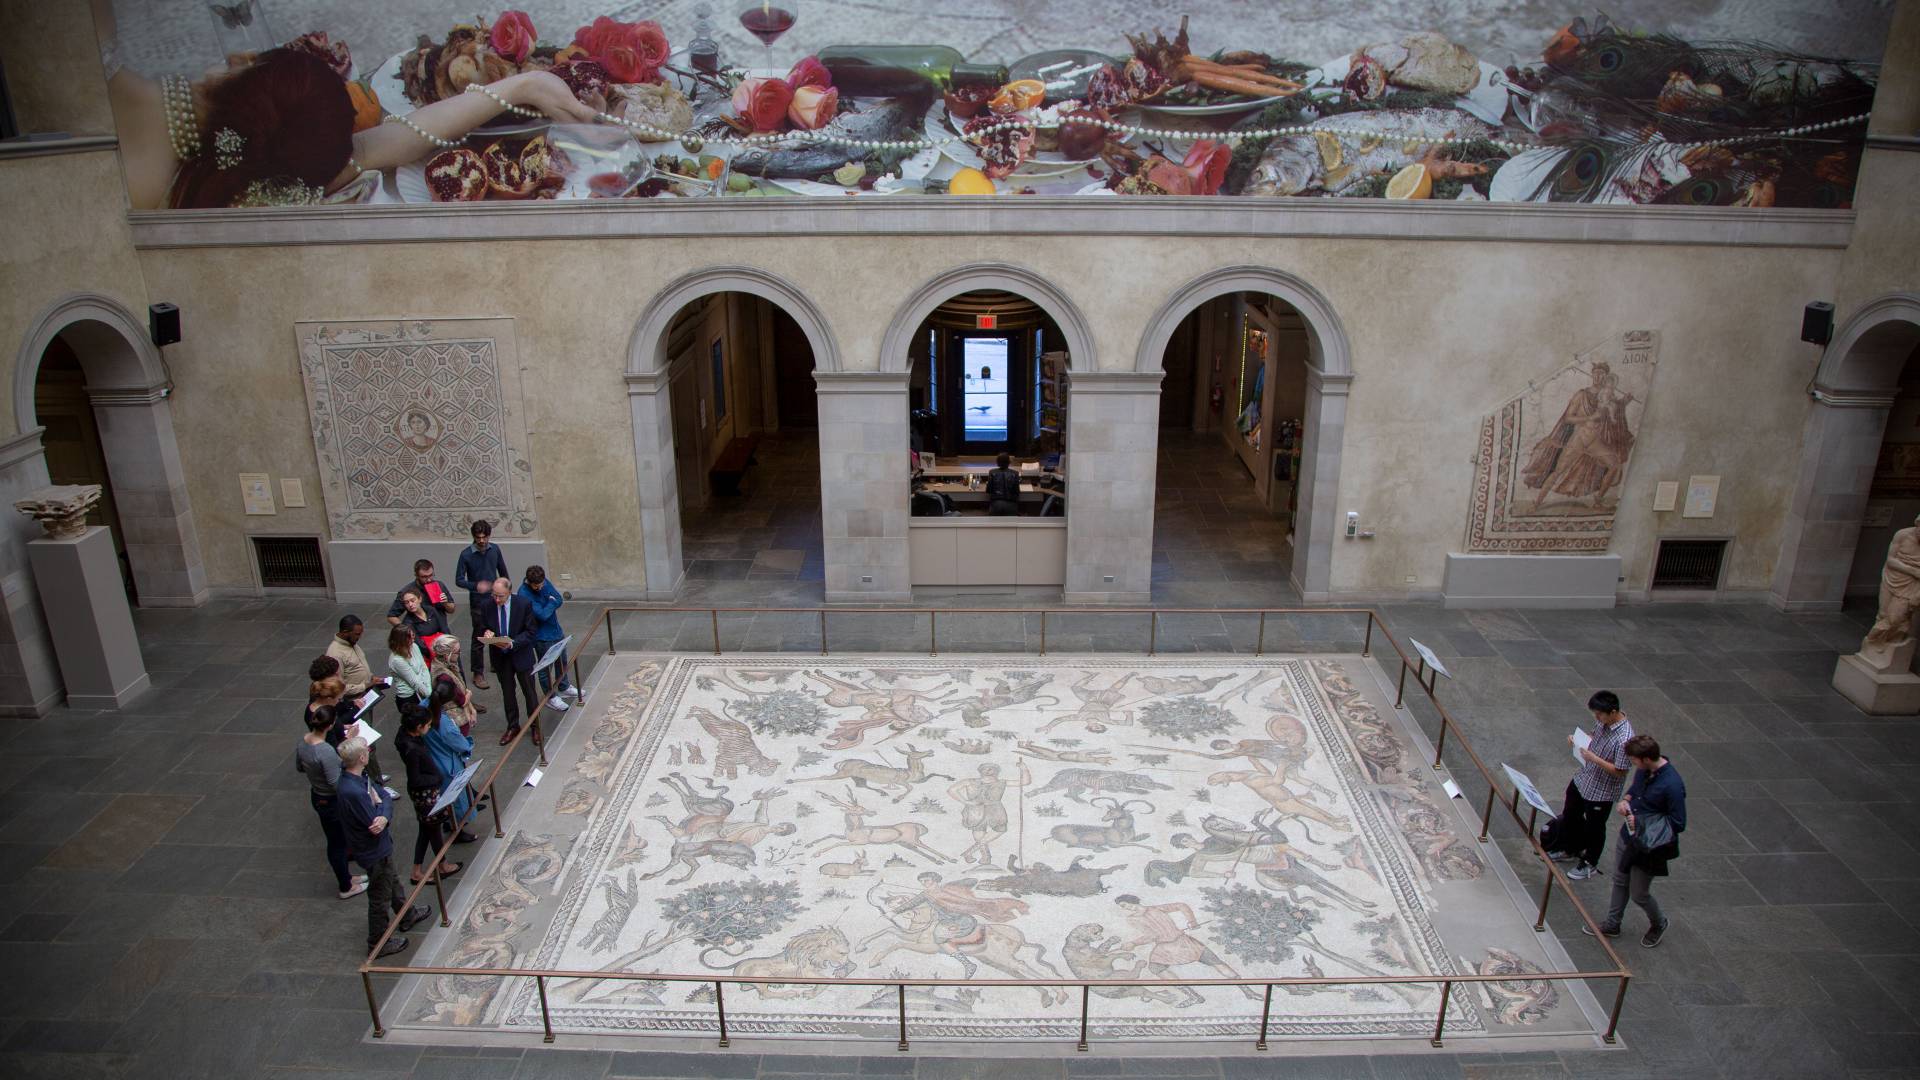 Aerial view of large mosaic and wall painting at Worcester Art Museum